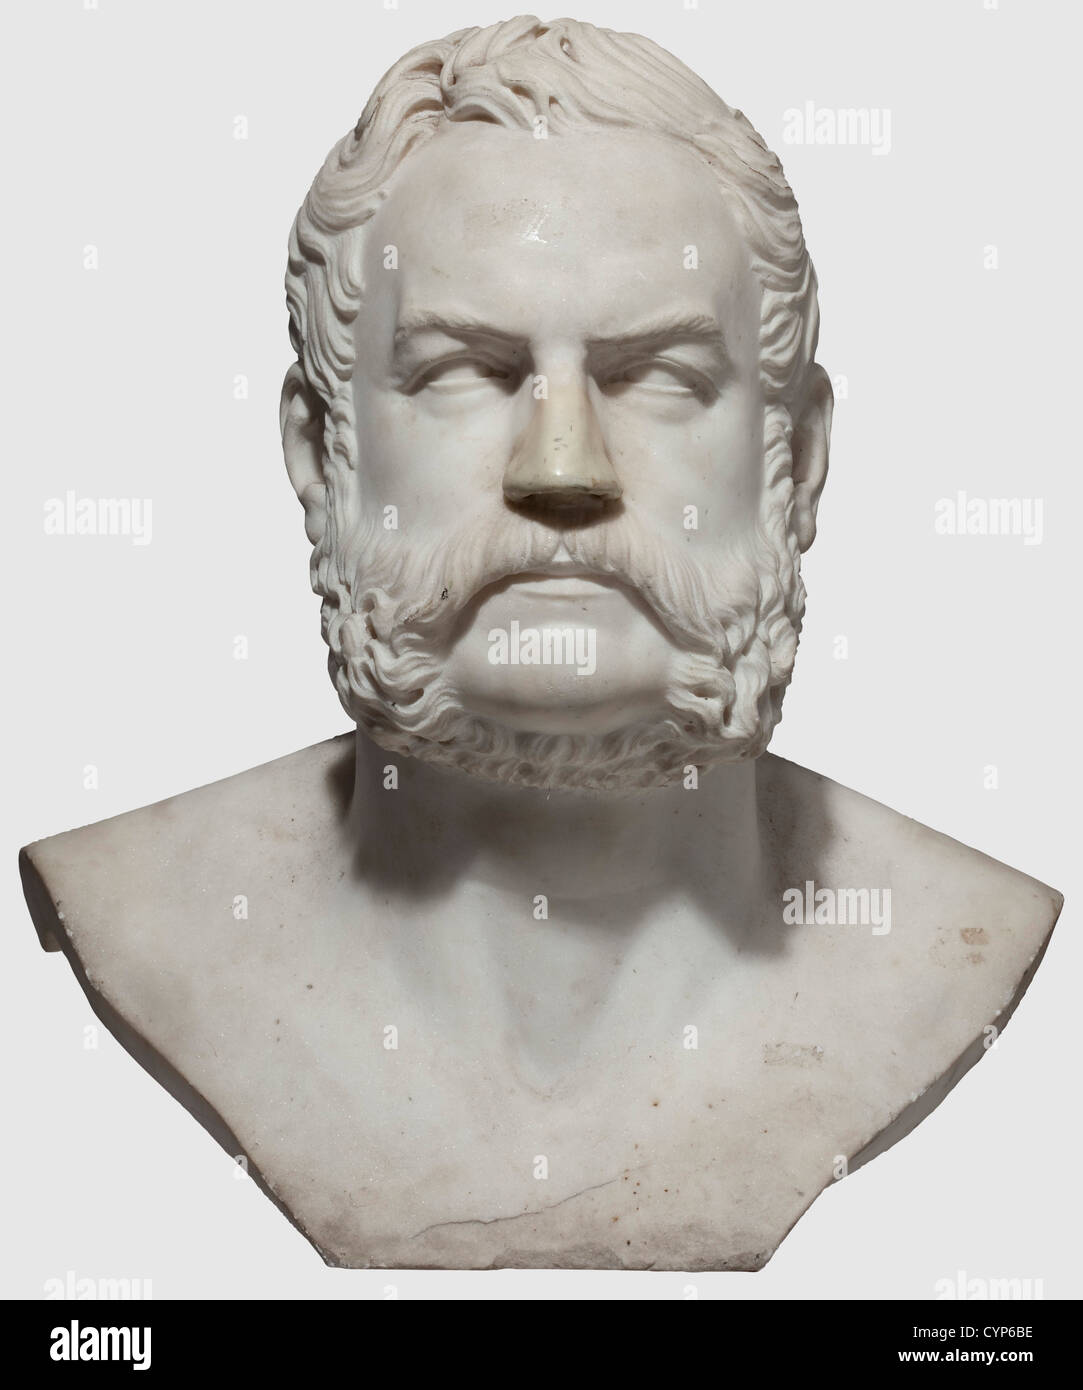 Vincenz Pilz(1816 - 1896)- a marble bust of an archduke,or another high standing person.White marble,worked in very great detail in an antique style.The nose damaged and remodelled,partially worn.The left shoulder section signed and dated 'V:Pilz.fec:1870'.Height ca.50 cm.Vincenz Pilz,famous Viennese sculptor,pupil of Bauer and Kässmann at the Vienna Academy,received an imperial grant to study in Rome under Pietro Tenerani between 1850 and 1854.He created numerous sculptures for public buildings in Vienna such as the statues for the facade of the,Additional-Rights-Clearences-Not Available Stock Photo